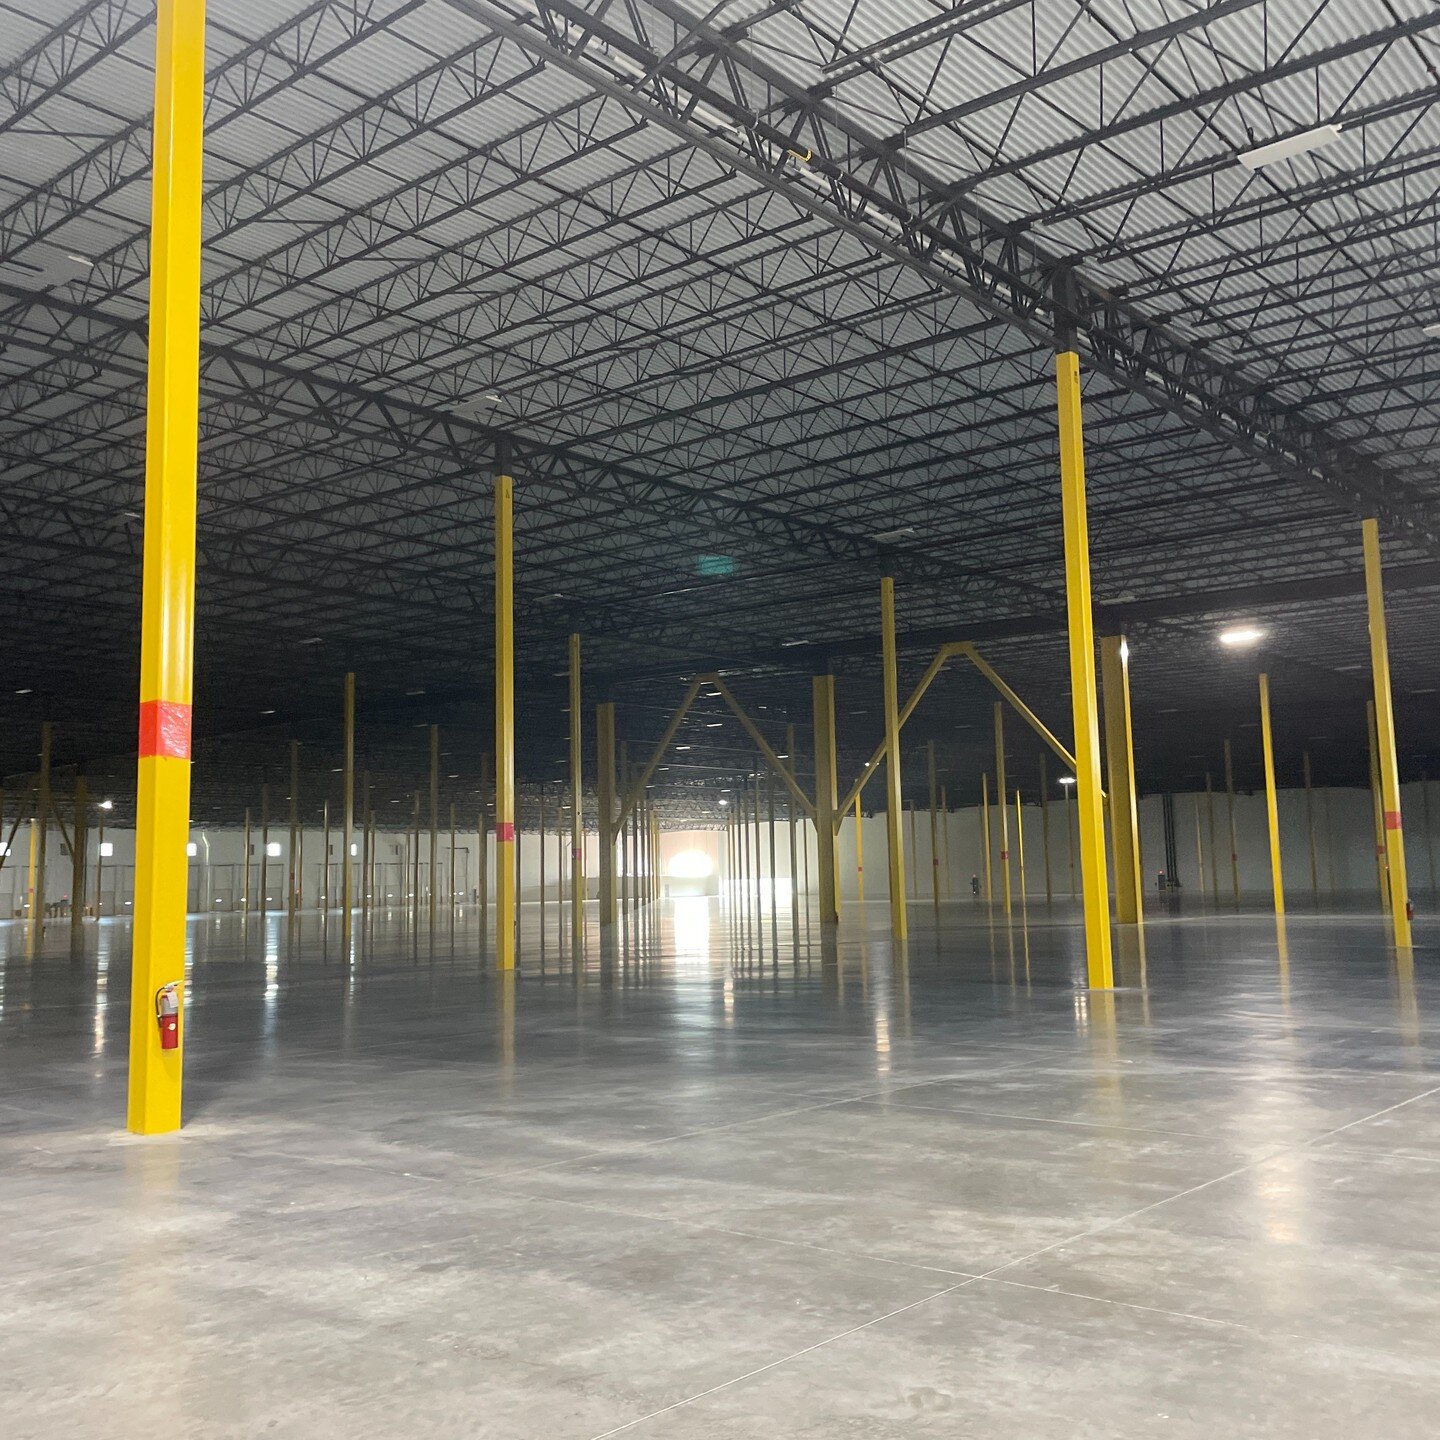 Clarion Partners continues to earn LEED Certifications for new warehouse and logistics facility projects at a rapid pace using the LEED Volume Program developed in partnership with Argento/Graham. 

Under the Volume program, Clarion will achieve LEED